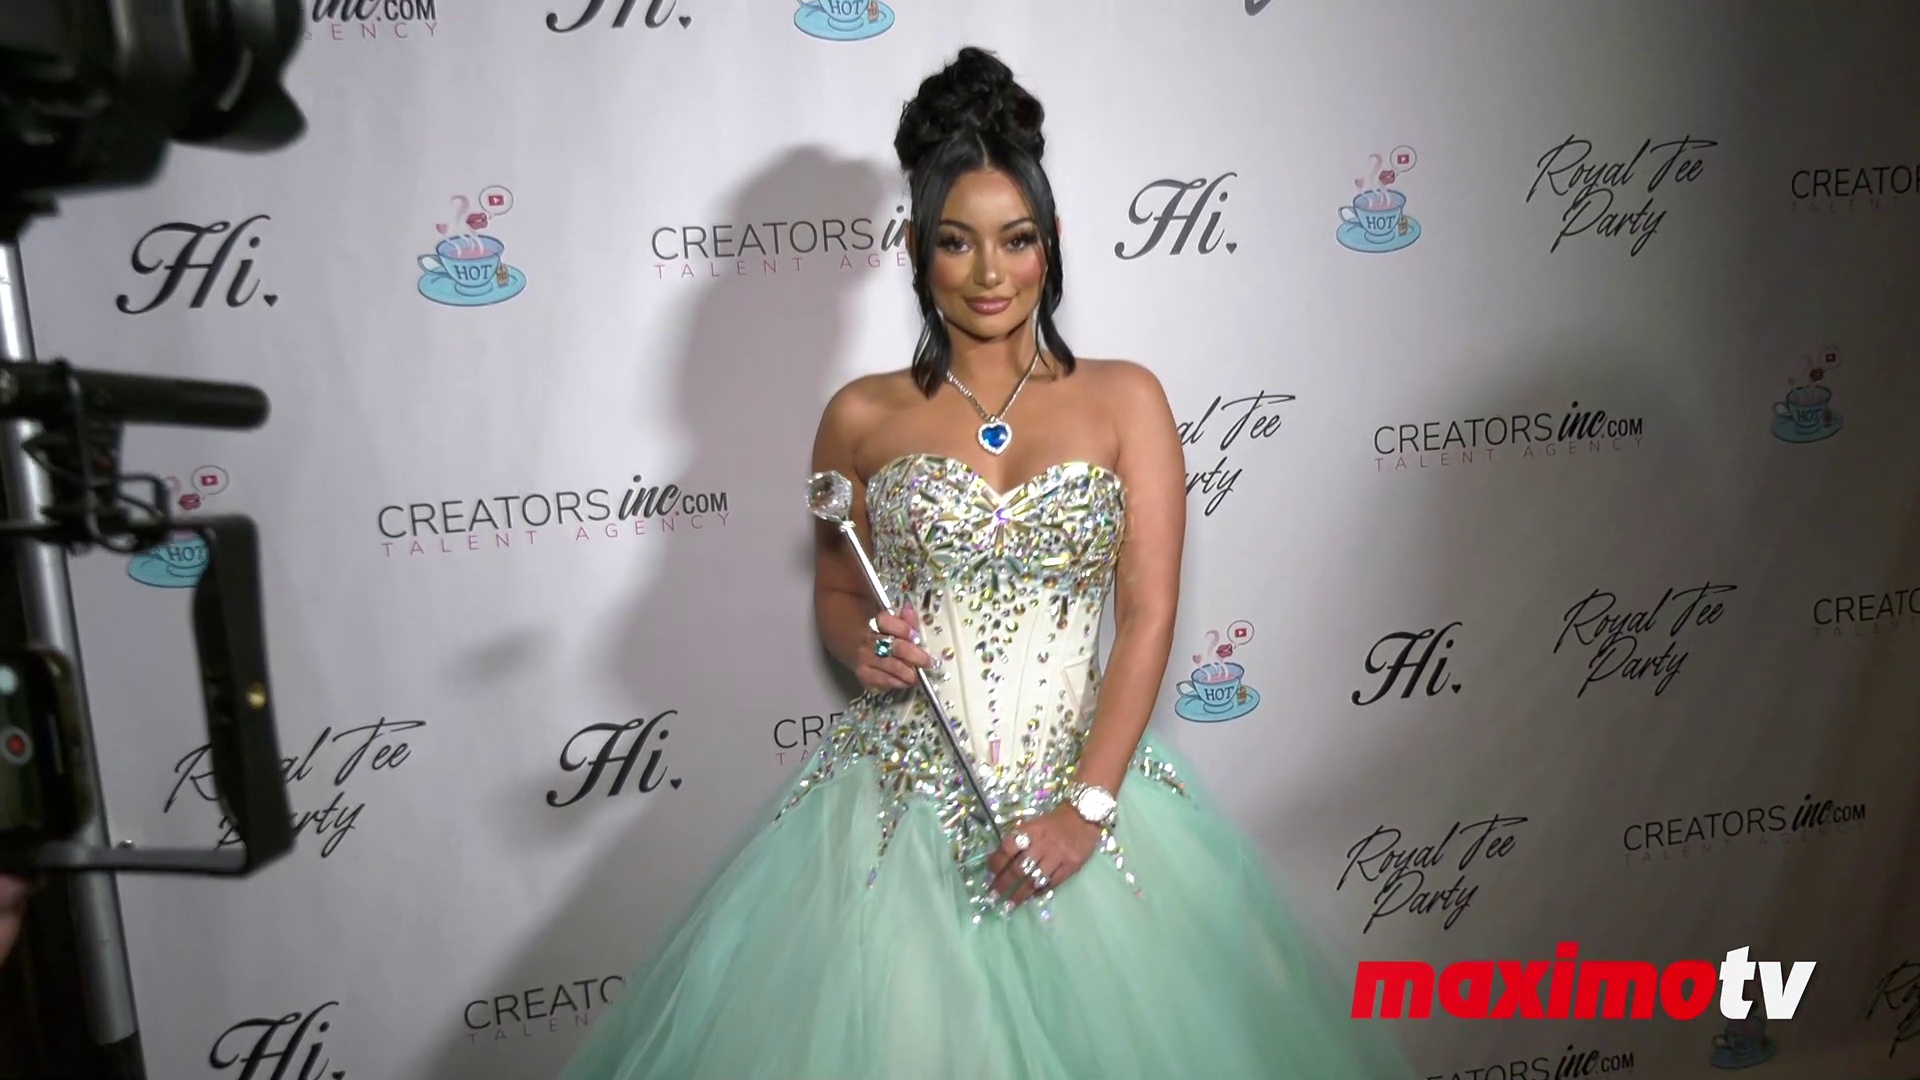 Tamera “Tee” Kissen attends her ‘Royal Tee Party’ birthday celebration in Los Angeles